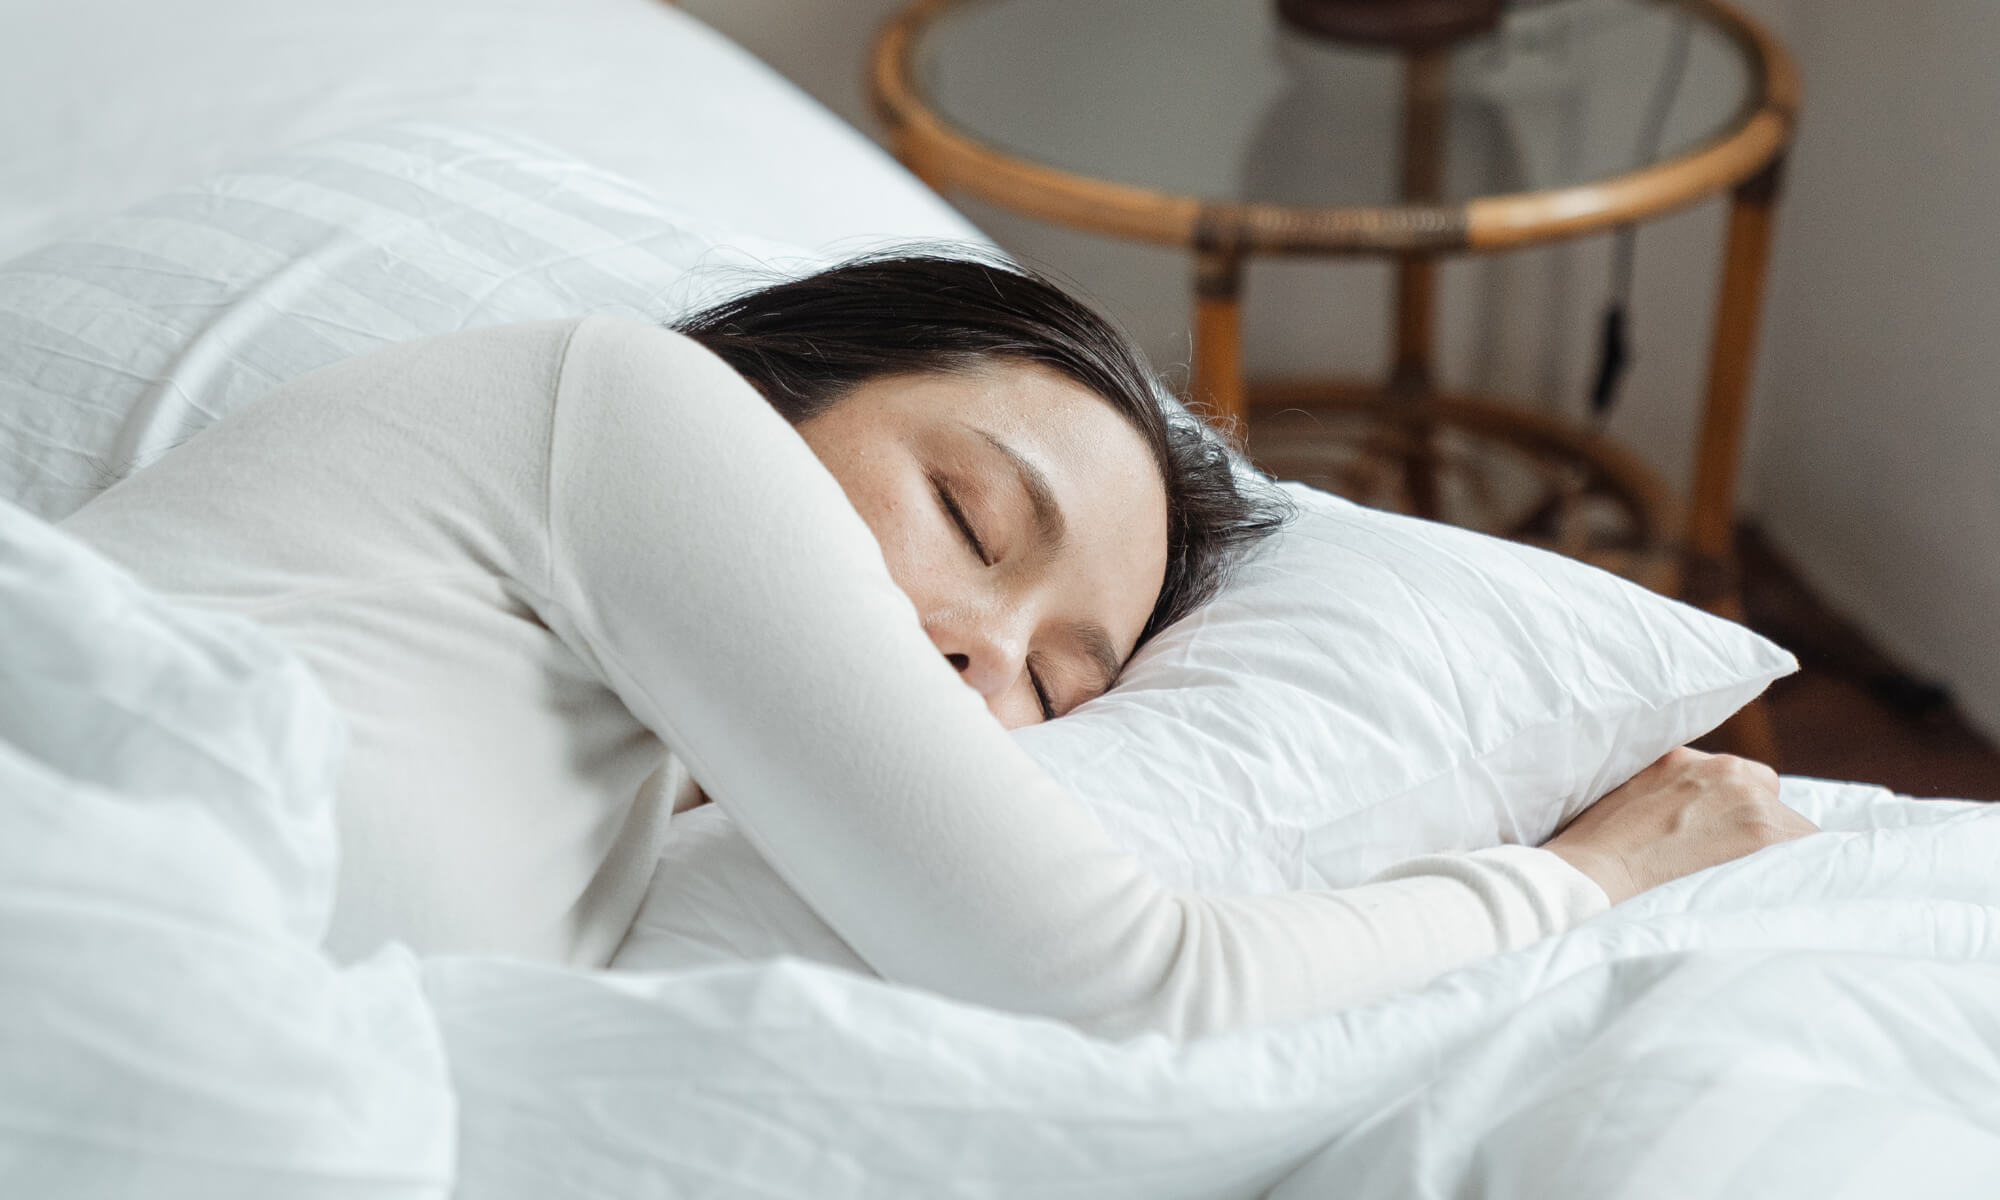 No More Counting Sheep: How CBDa can help you get the sleep you deserve